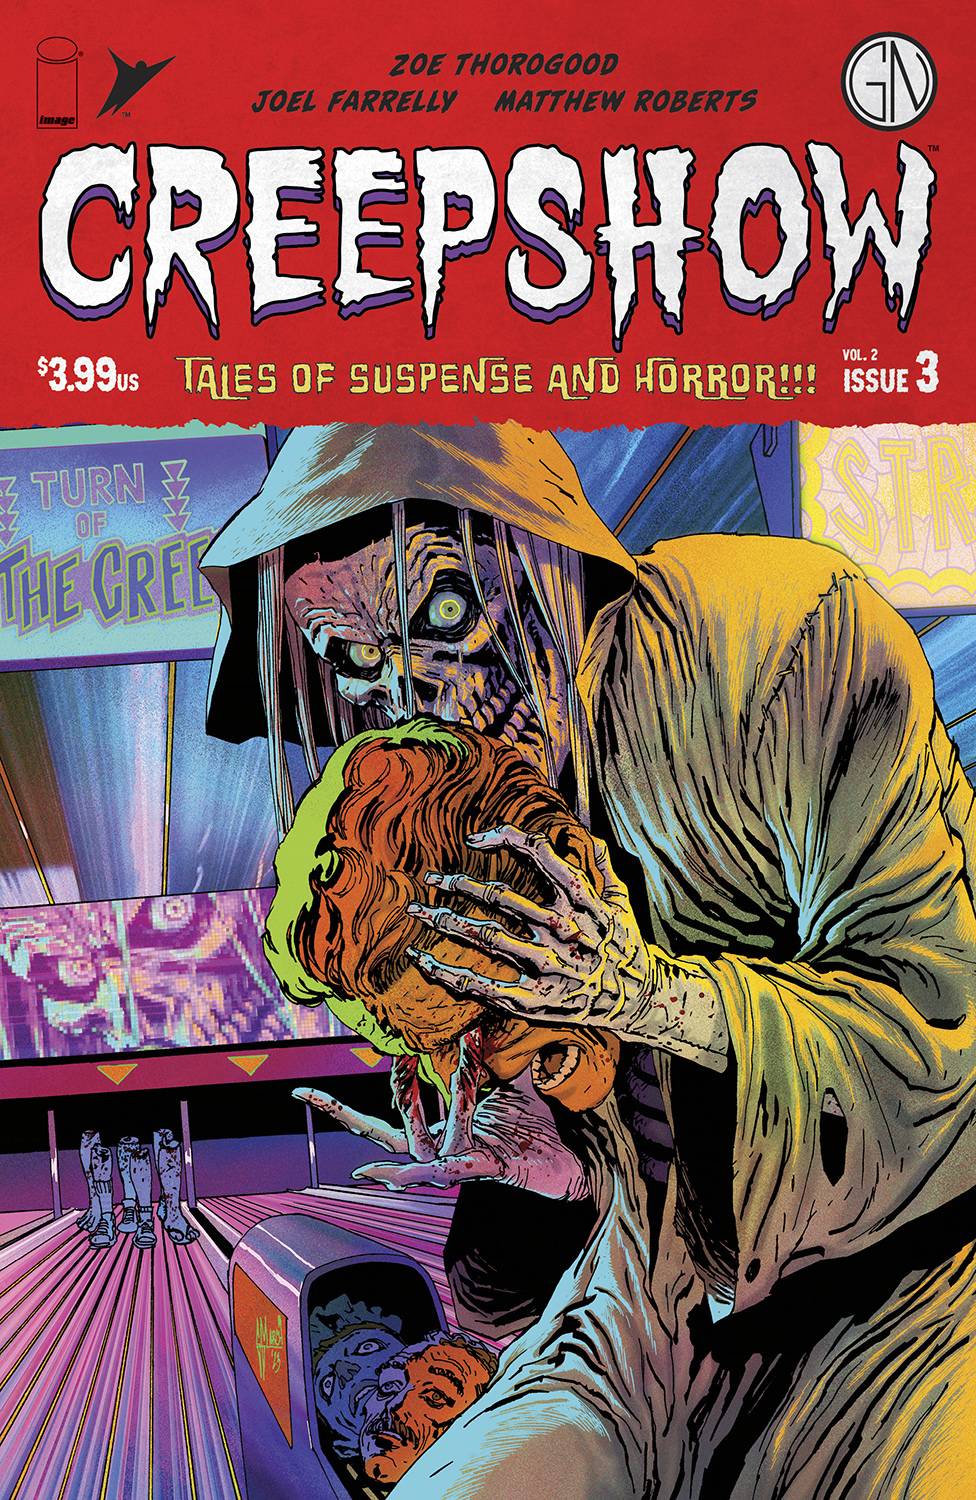 Creepshow Volume 2 #3 Cover A March (Mature) (Of 5)